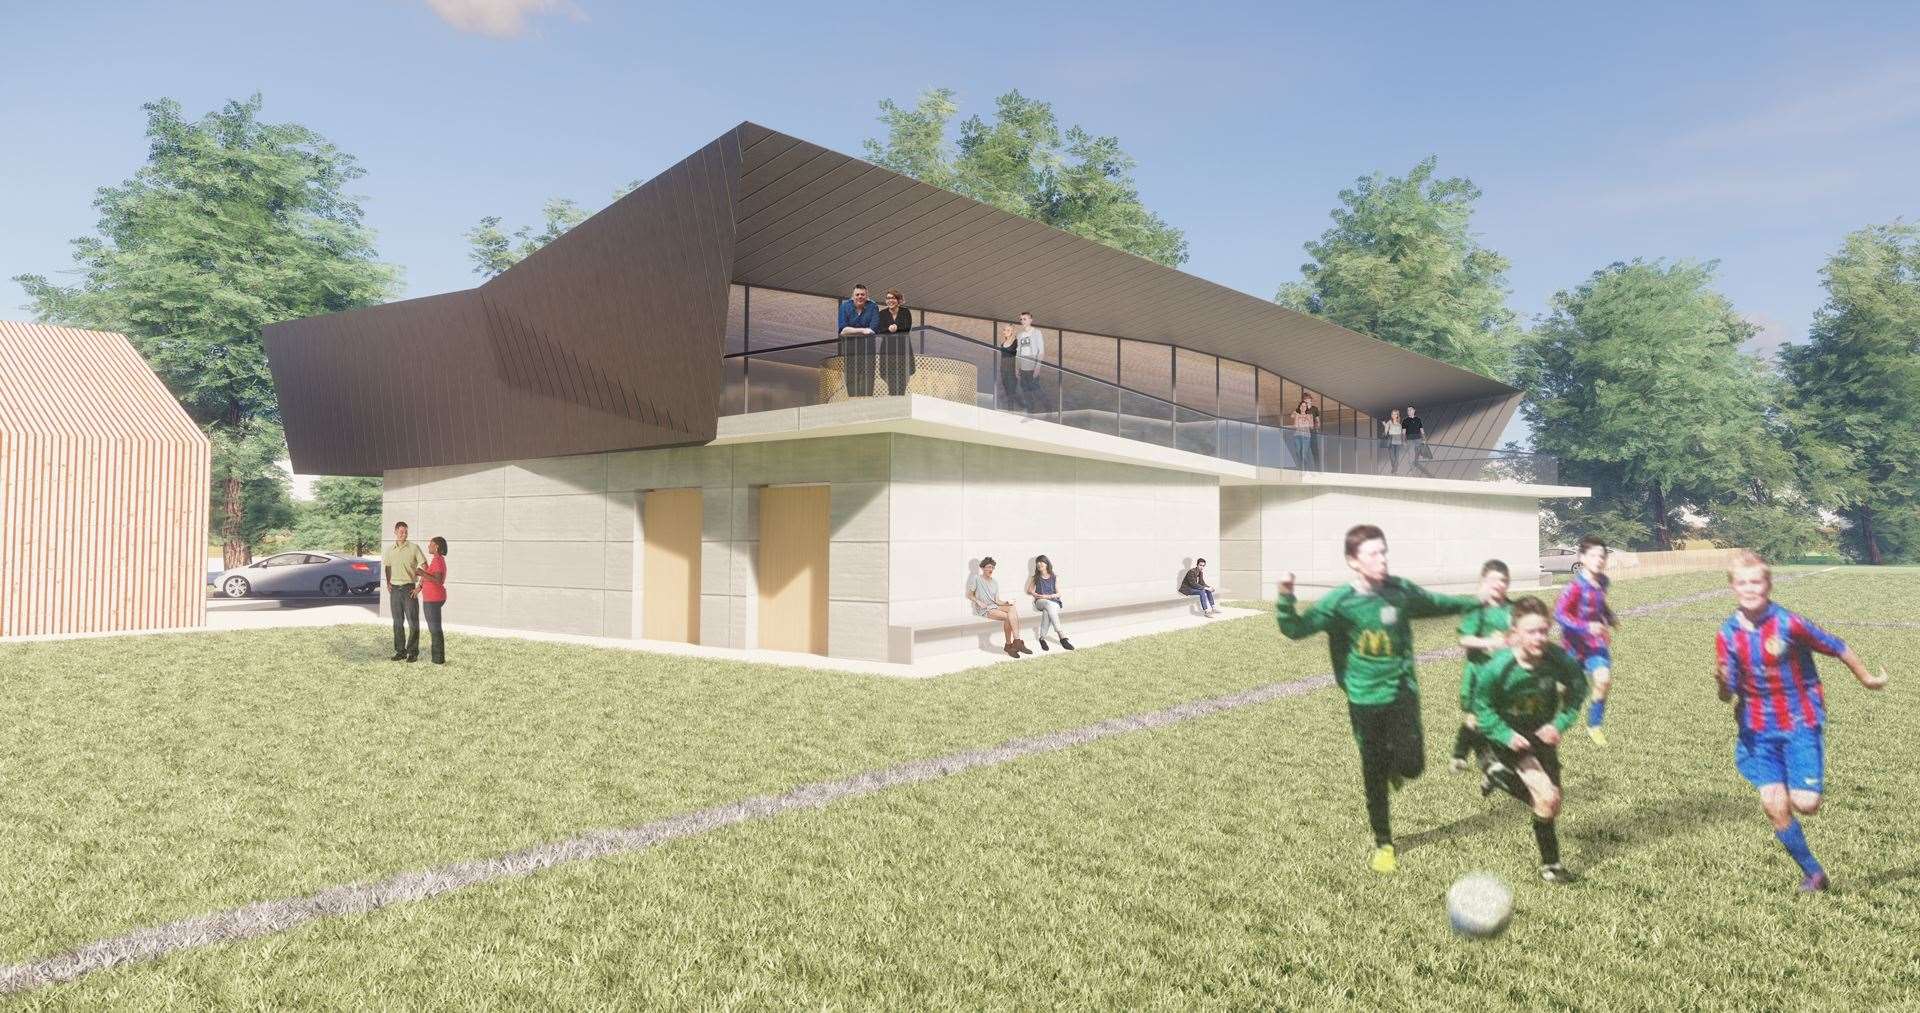 The new leisure centre proposed for New Romney